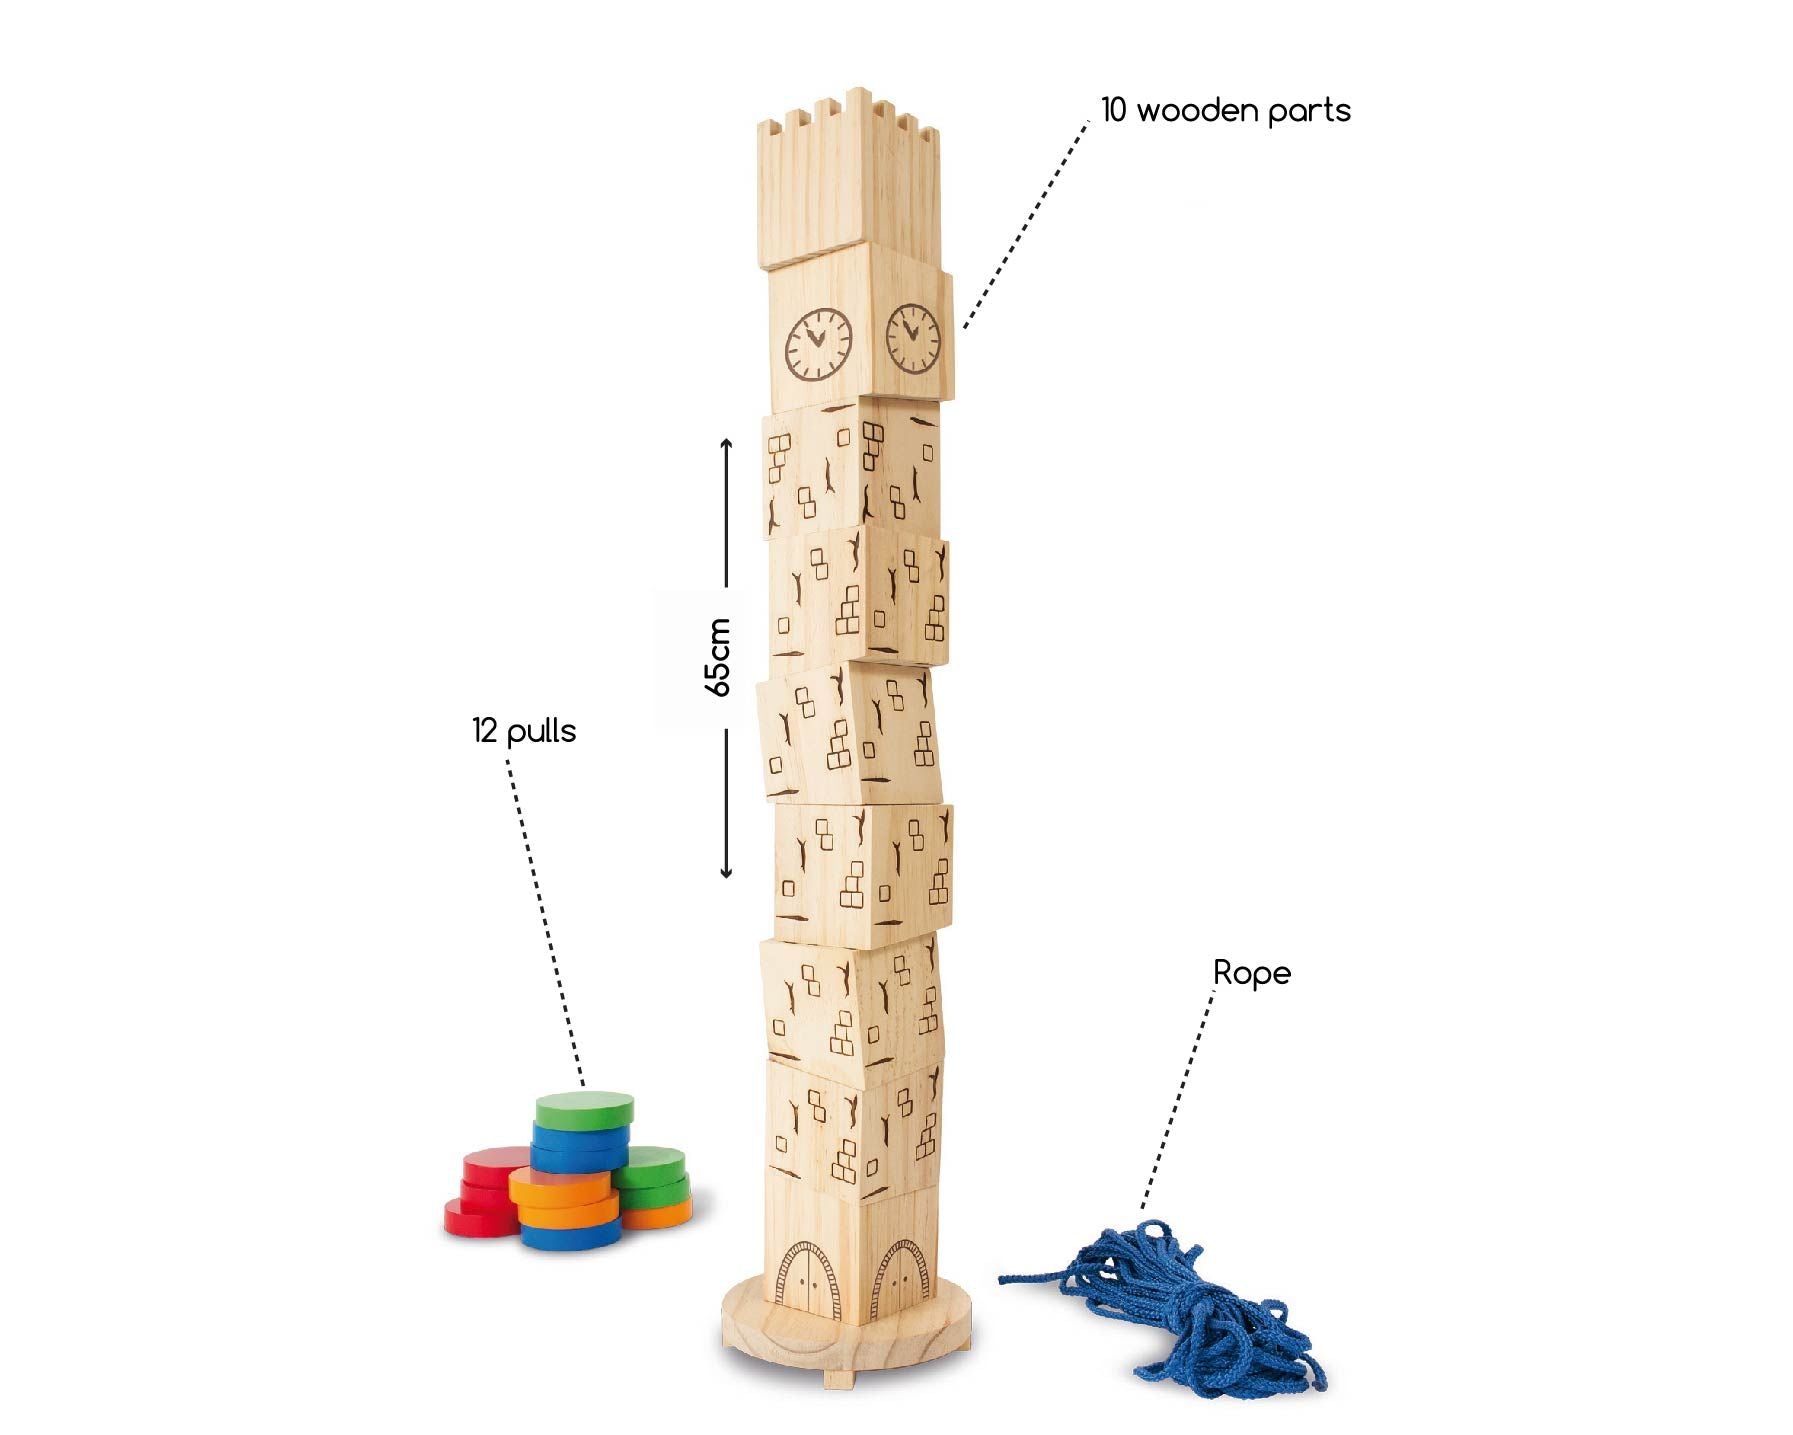 BS TOYS - Tower of Balance